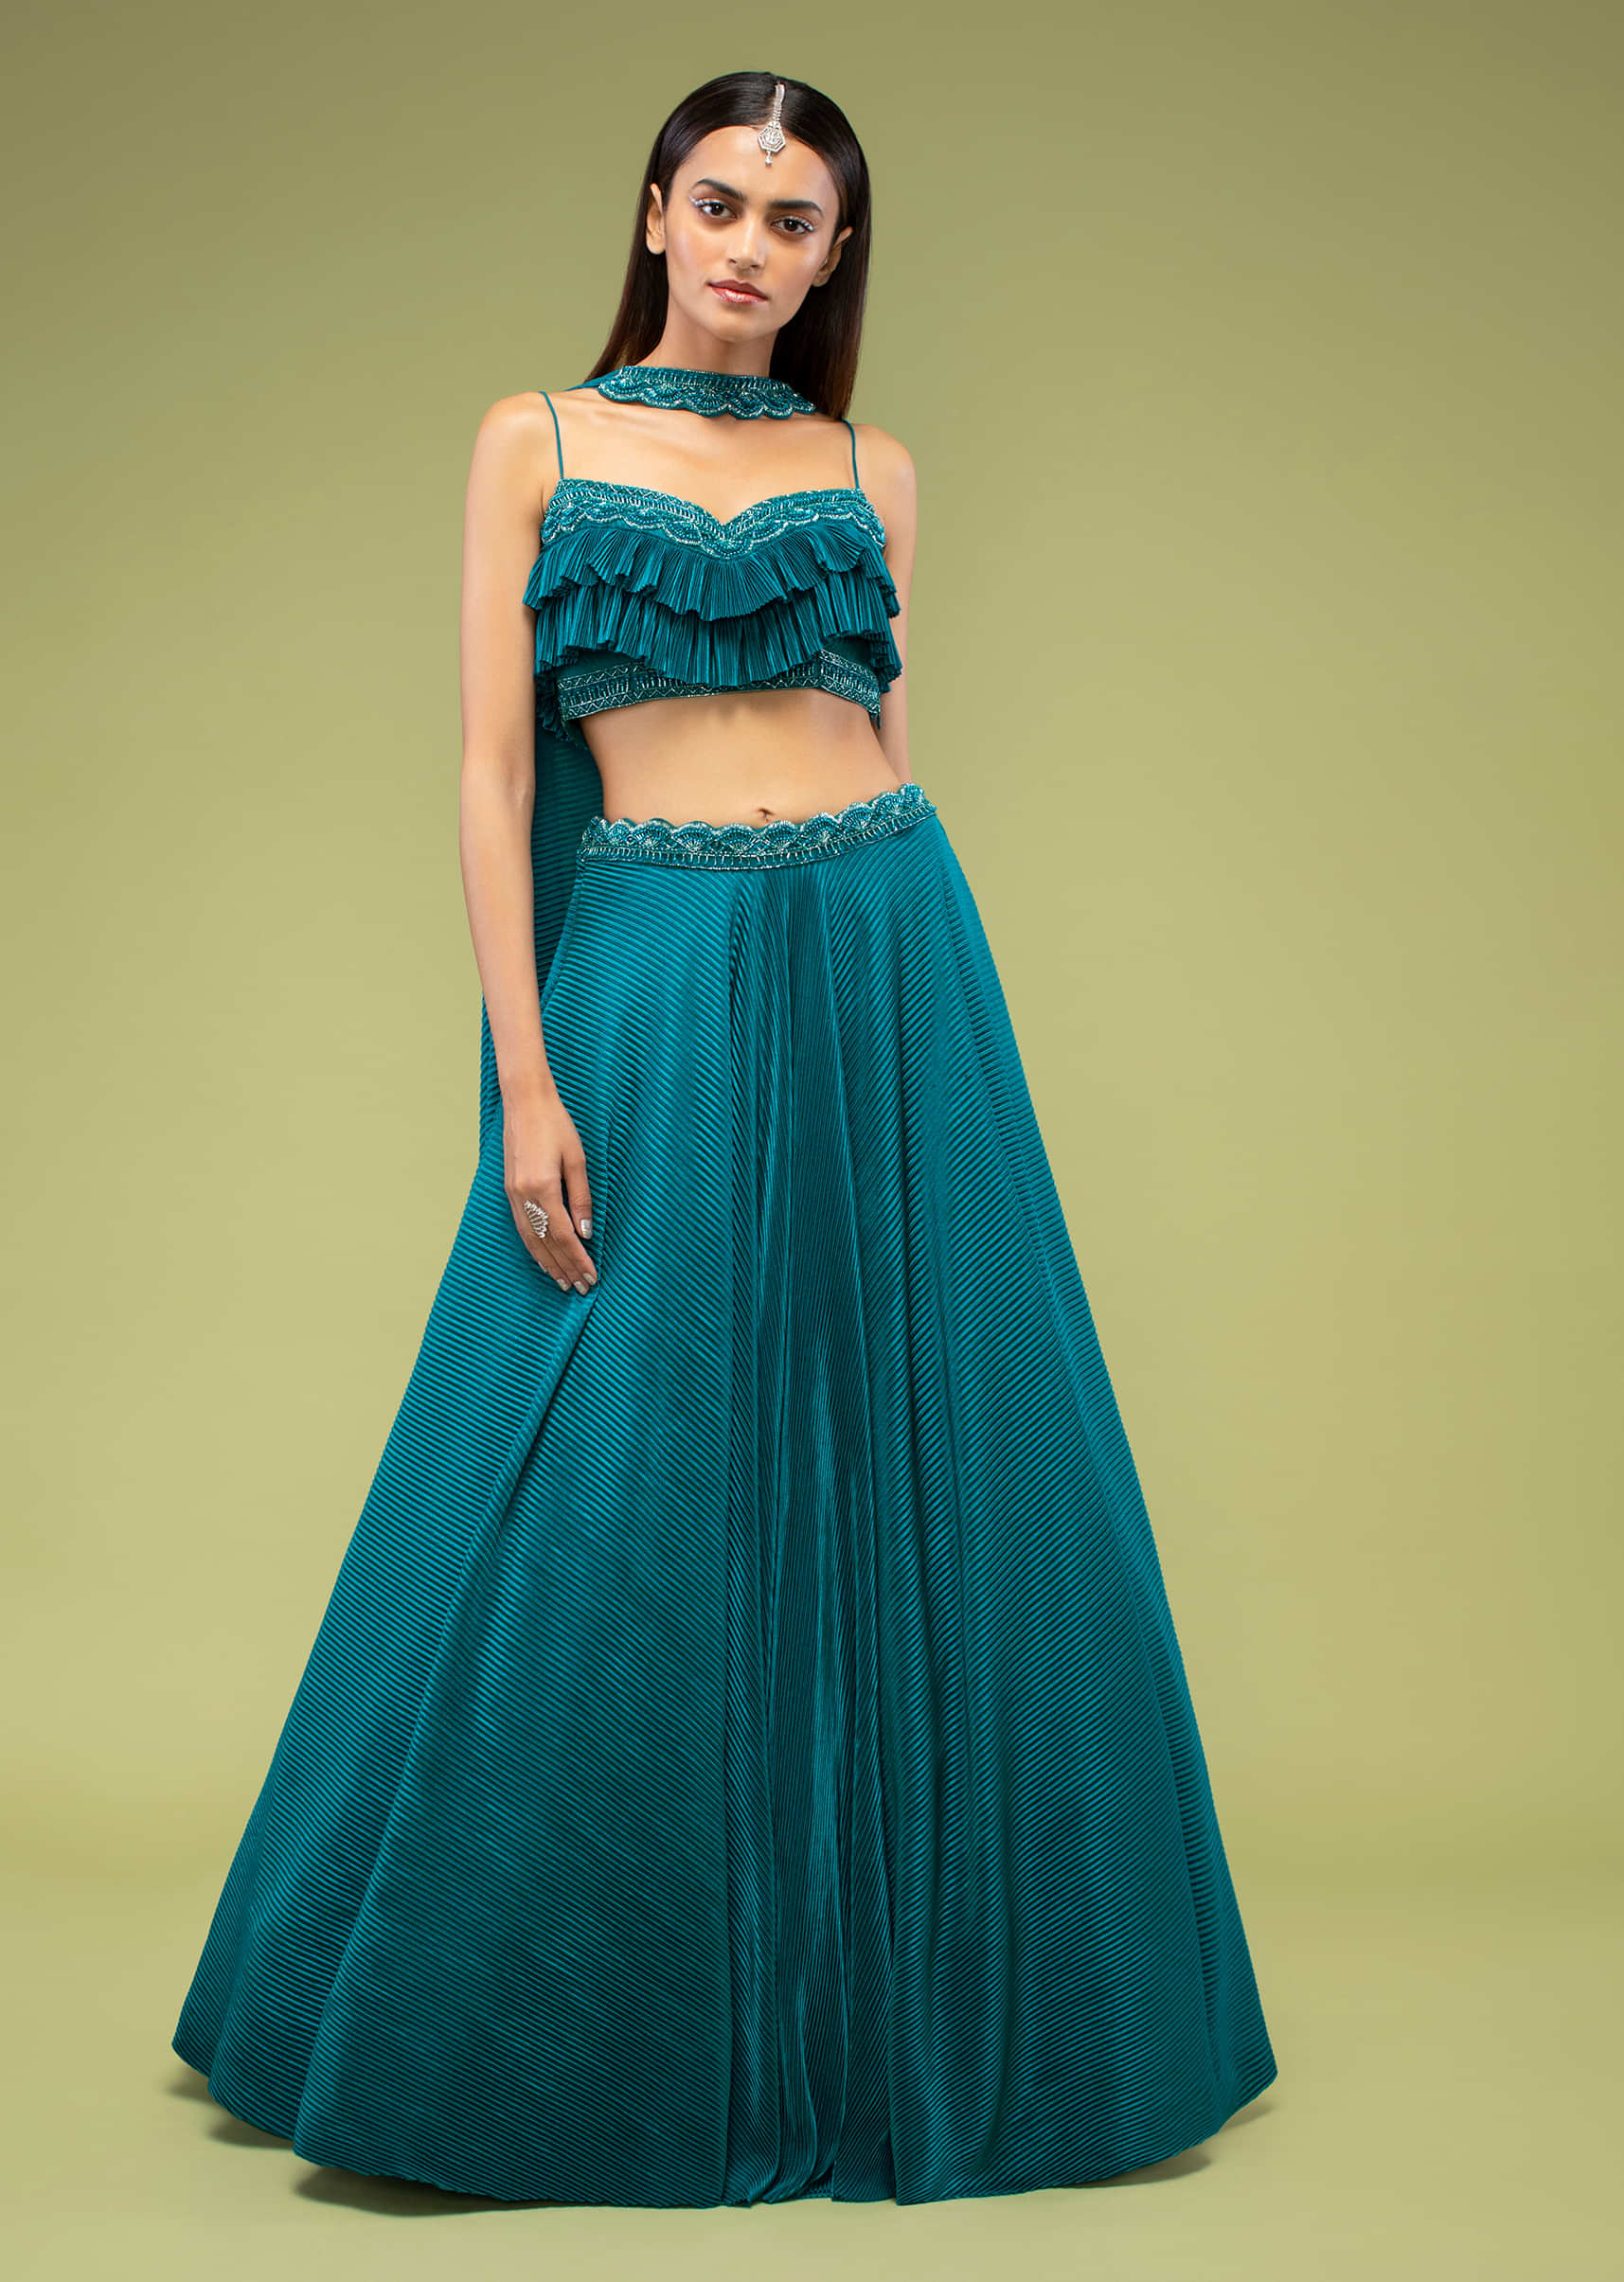 Teal Lehenga And Crop Top In Crush With Fancy Layered Frill Detailing